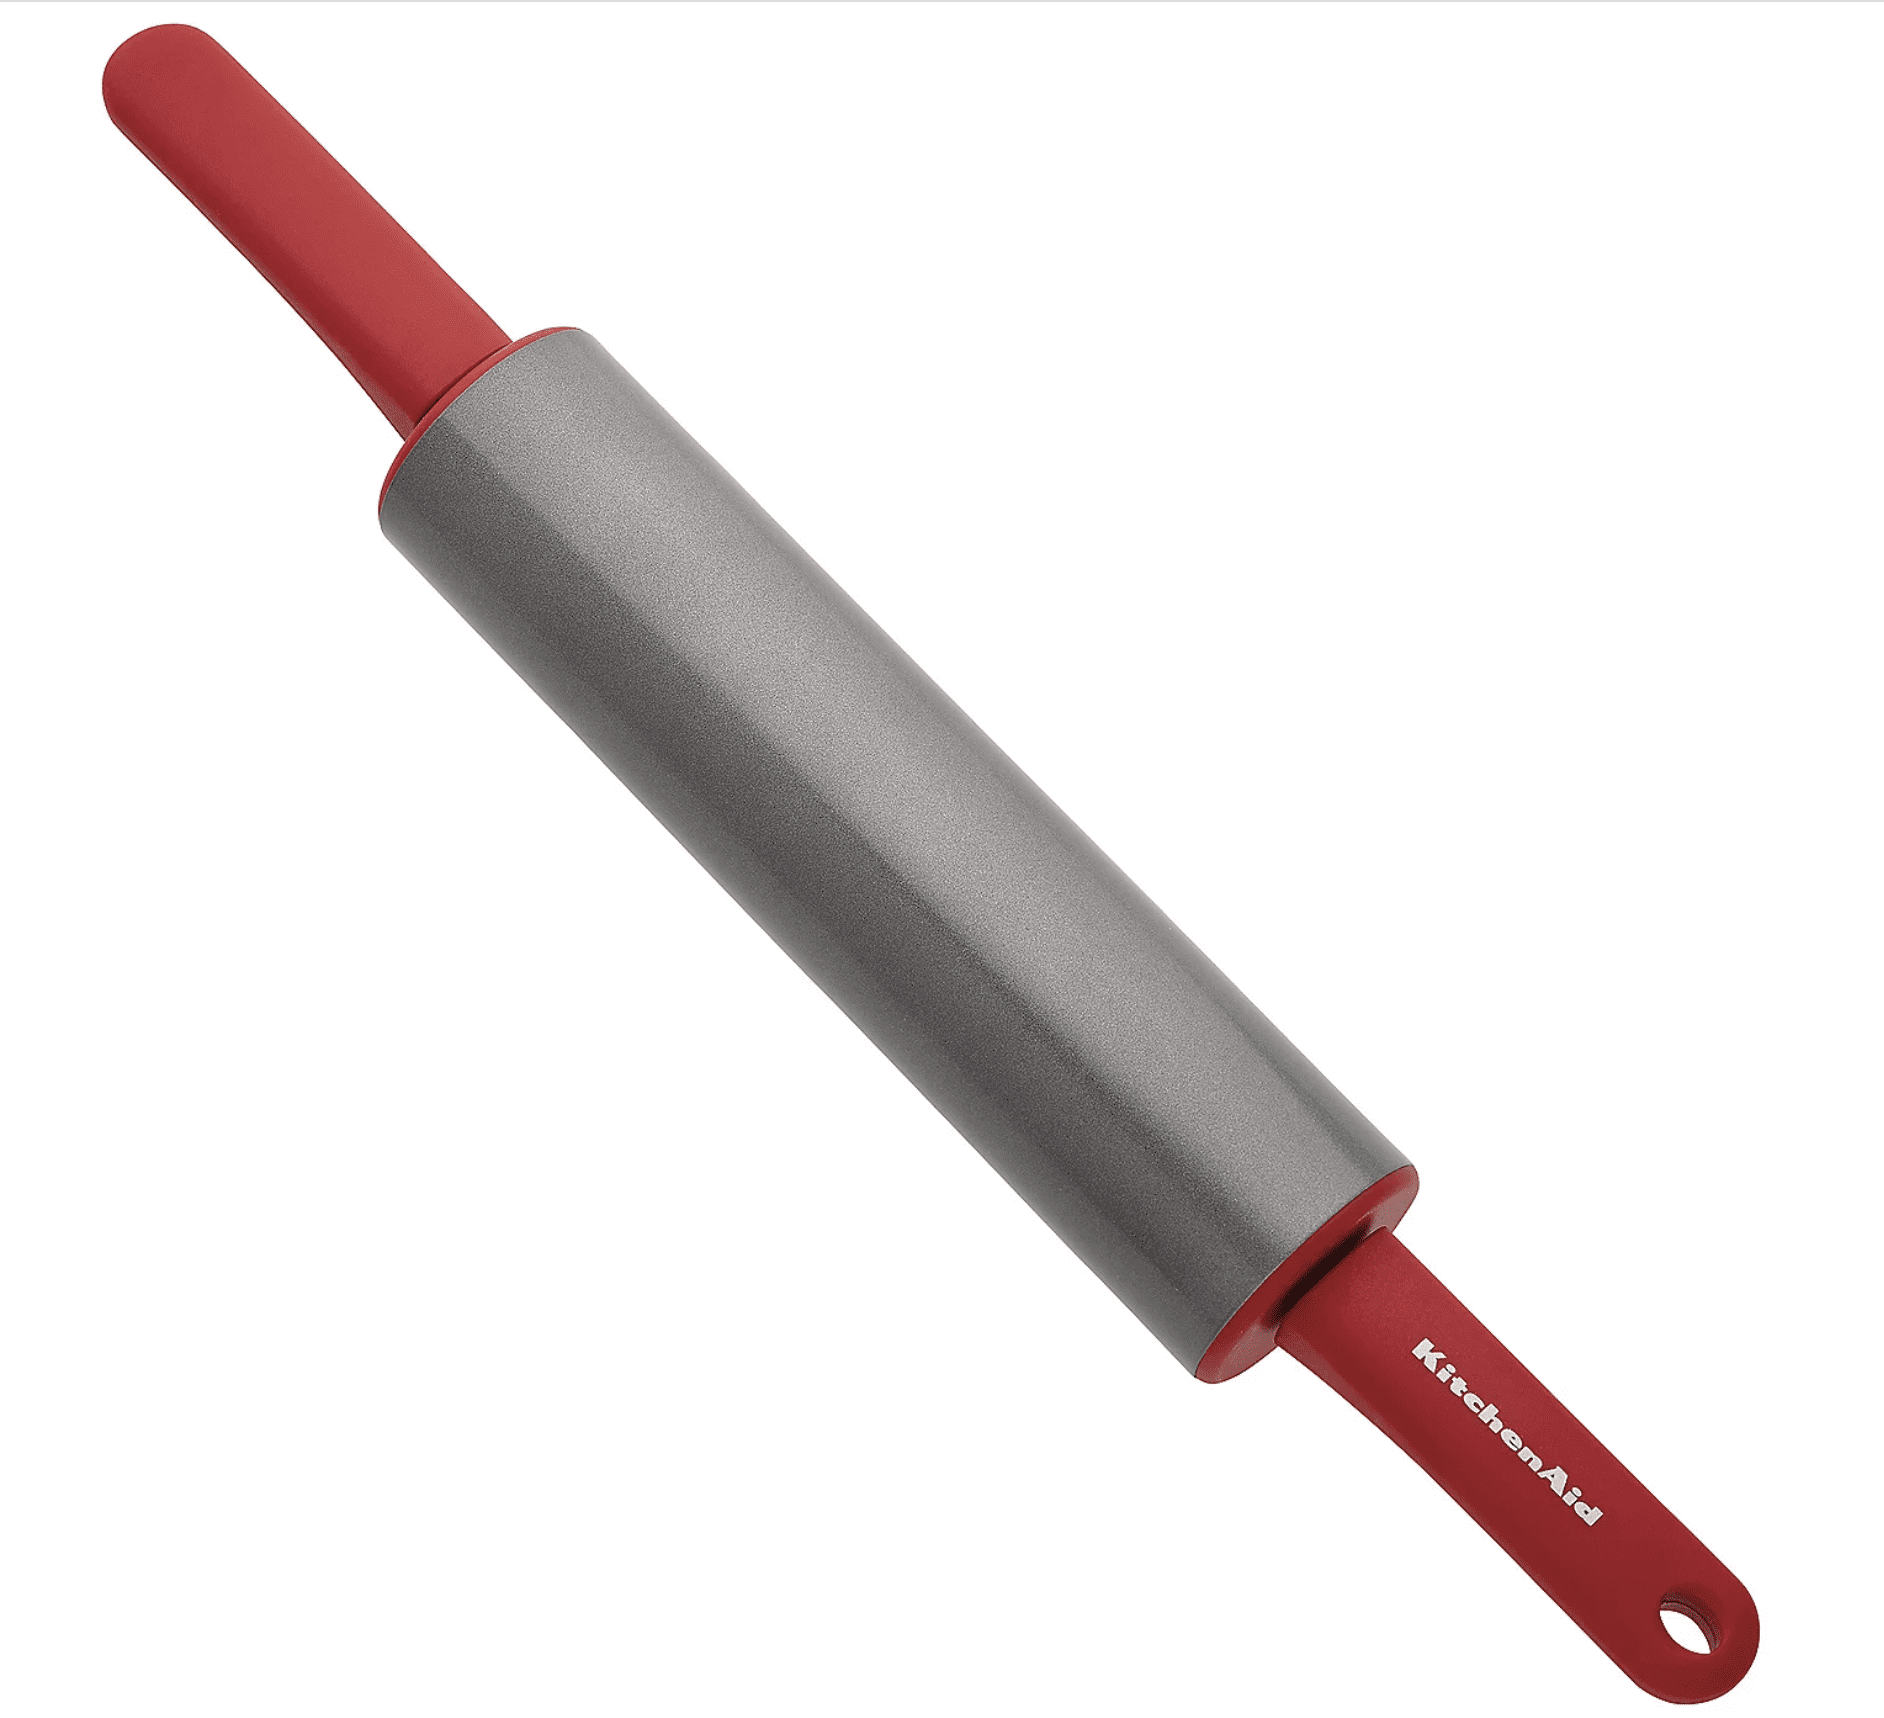 http://cdn.apartmenttherapy.info/image/upload/v1652801460/gen-workflow/product-database/KitchenAid_Red_Rolling_Pin.png